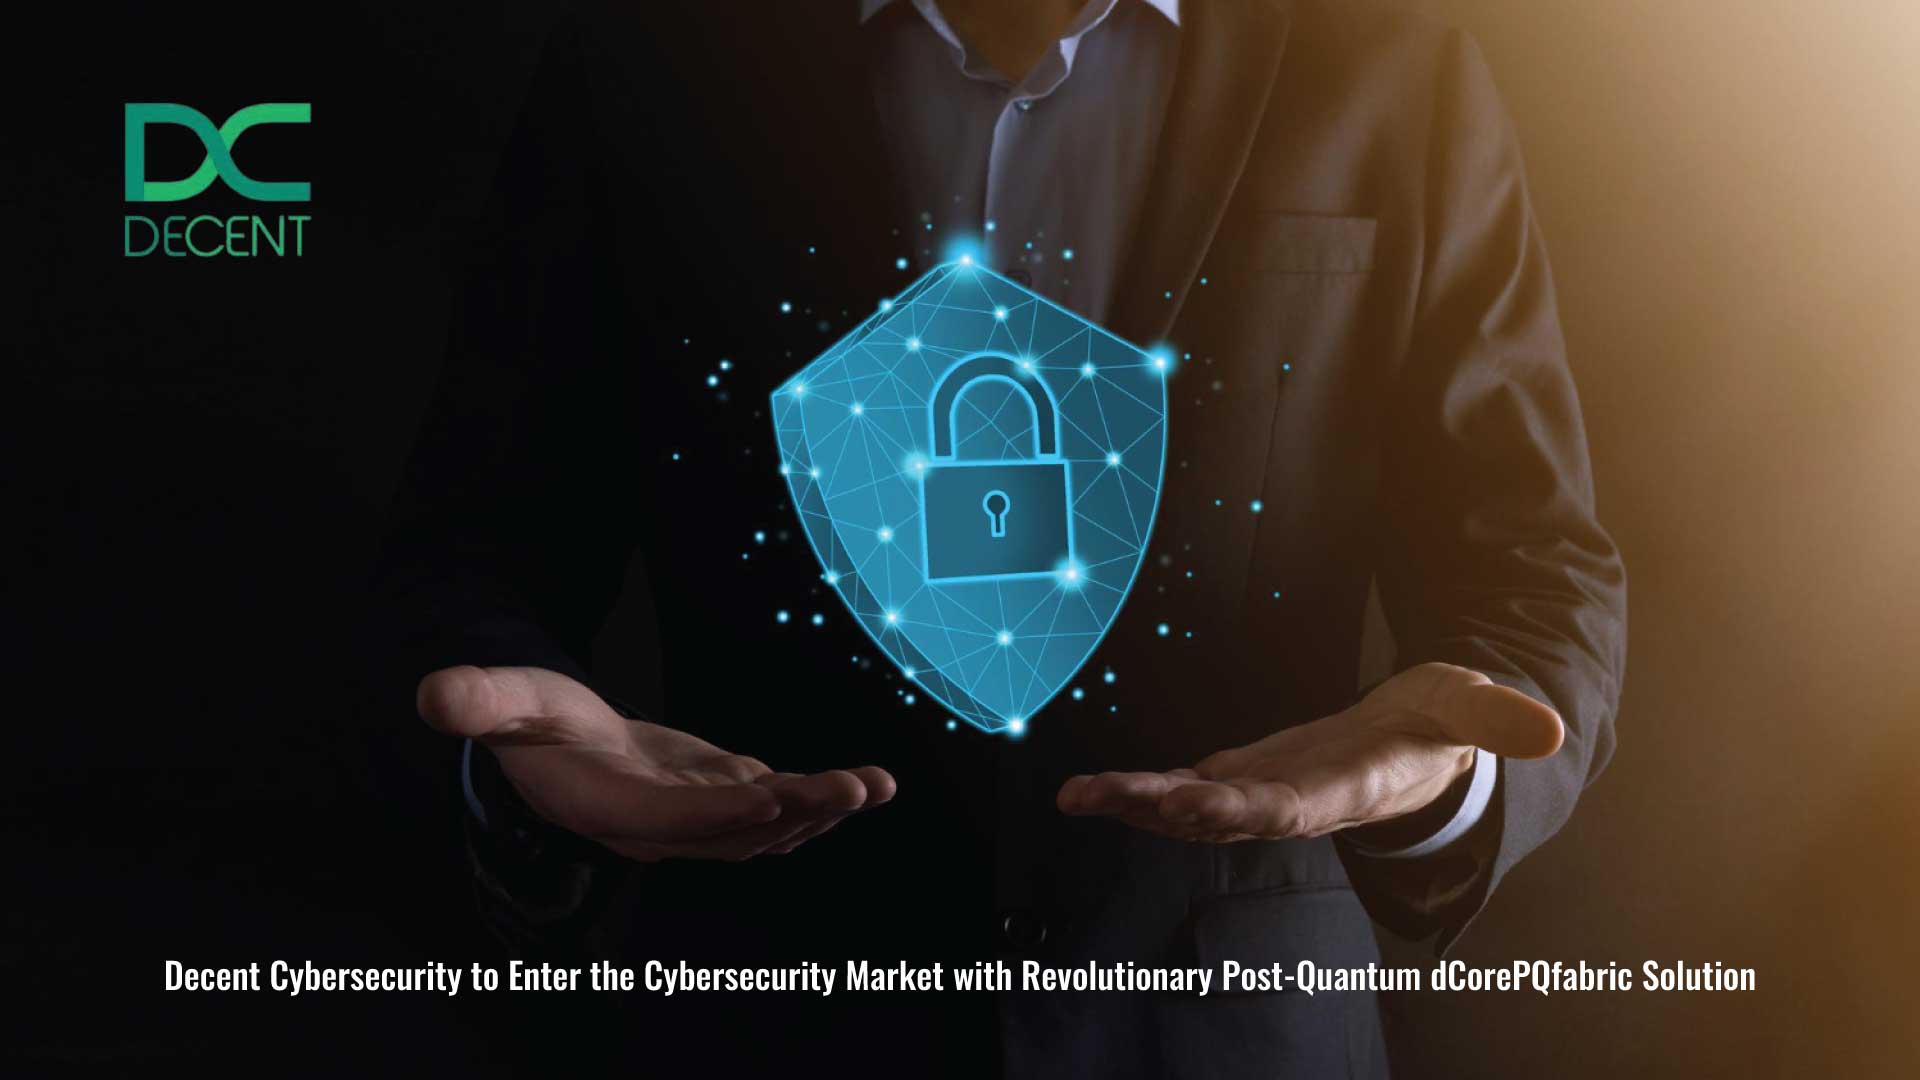 Decent Cybersecurity to Enter the Cybersecurity Market with Revolutionary Post-Quantum dCorePQfabric Solution